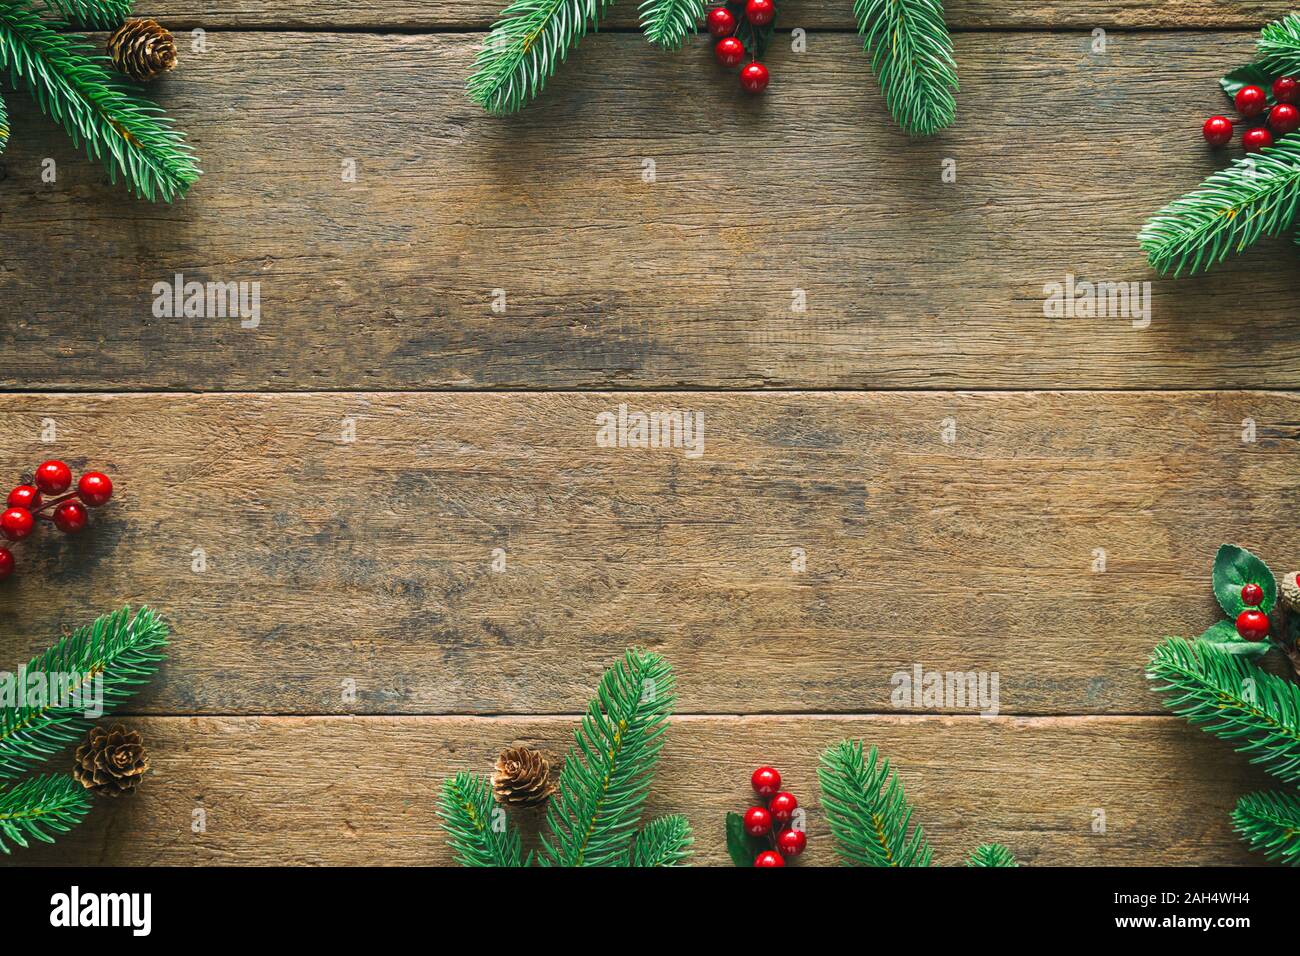 Holiday Christmas card background with festive decoration ball, stars, snowflakes, gift box, pine cones on a wood background from Flat lay, top view. Stock Photo